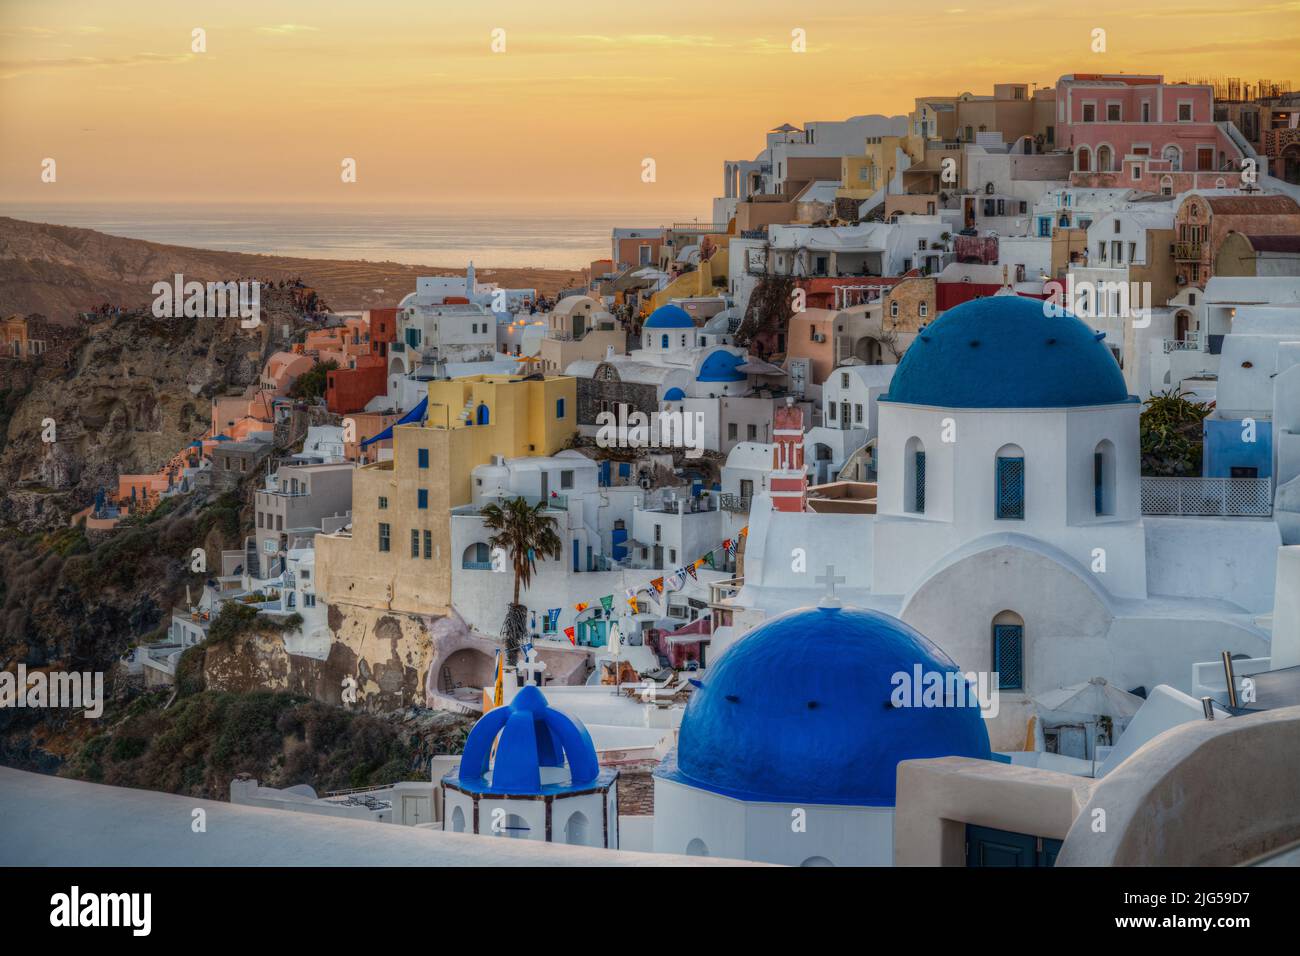 Scenic panoramic view of Oia village at sunset with the iconic blue domed church in the foreground, Santorini, Greece Stock Photo